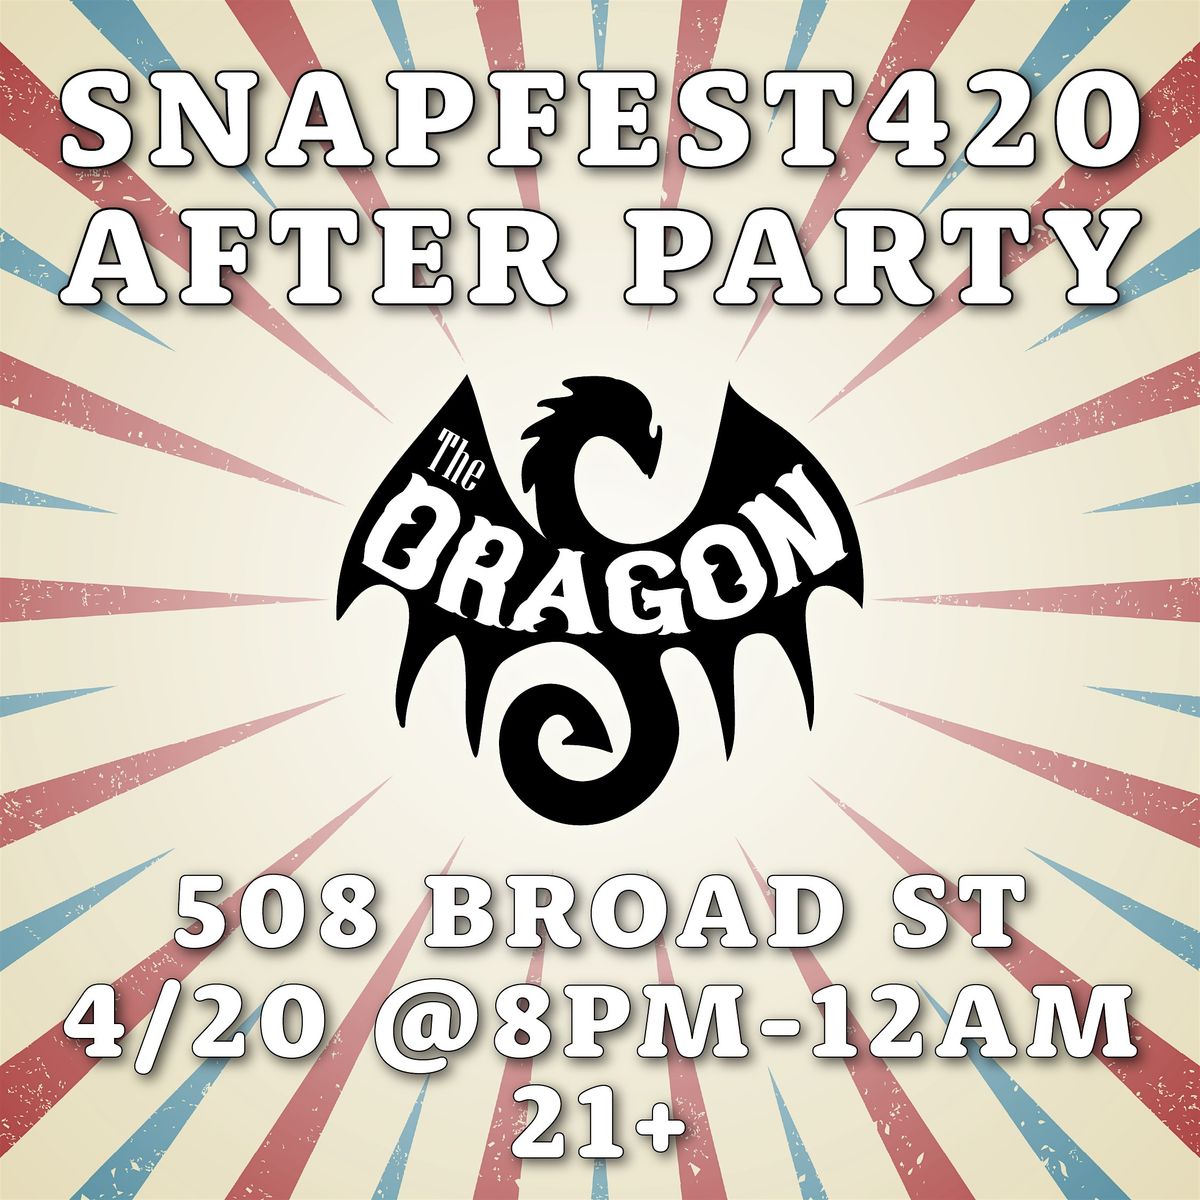 Snapfest Afterparty at The Dragon!